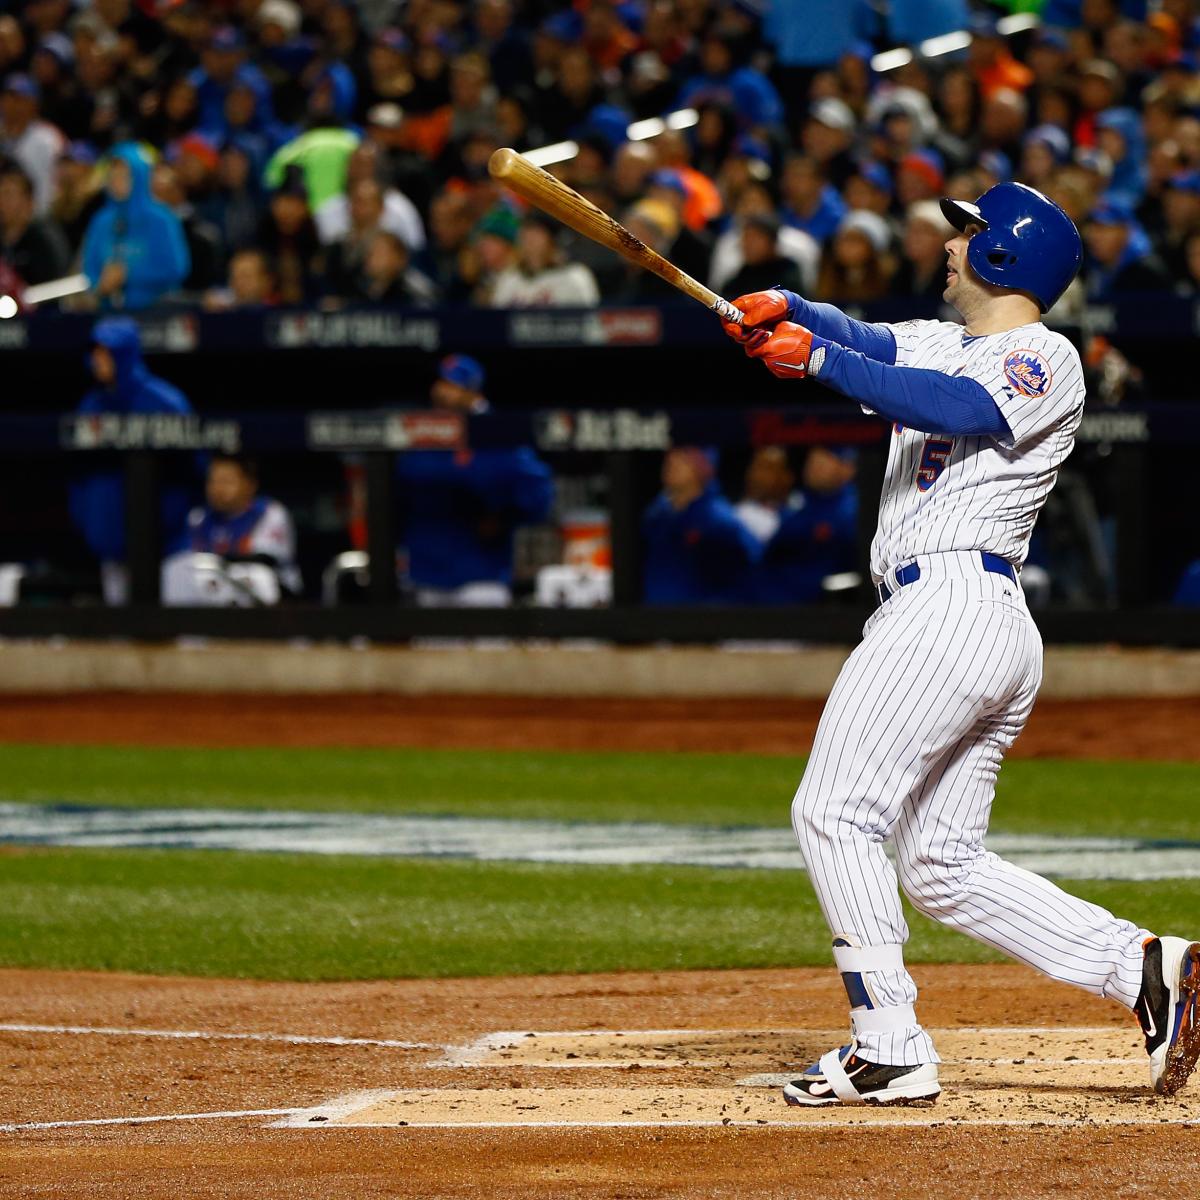 Royals vs. Mets Game 3 Live World Series Score and Highlights News